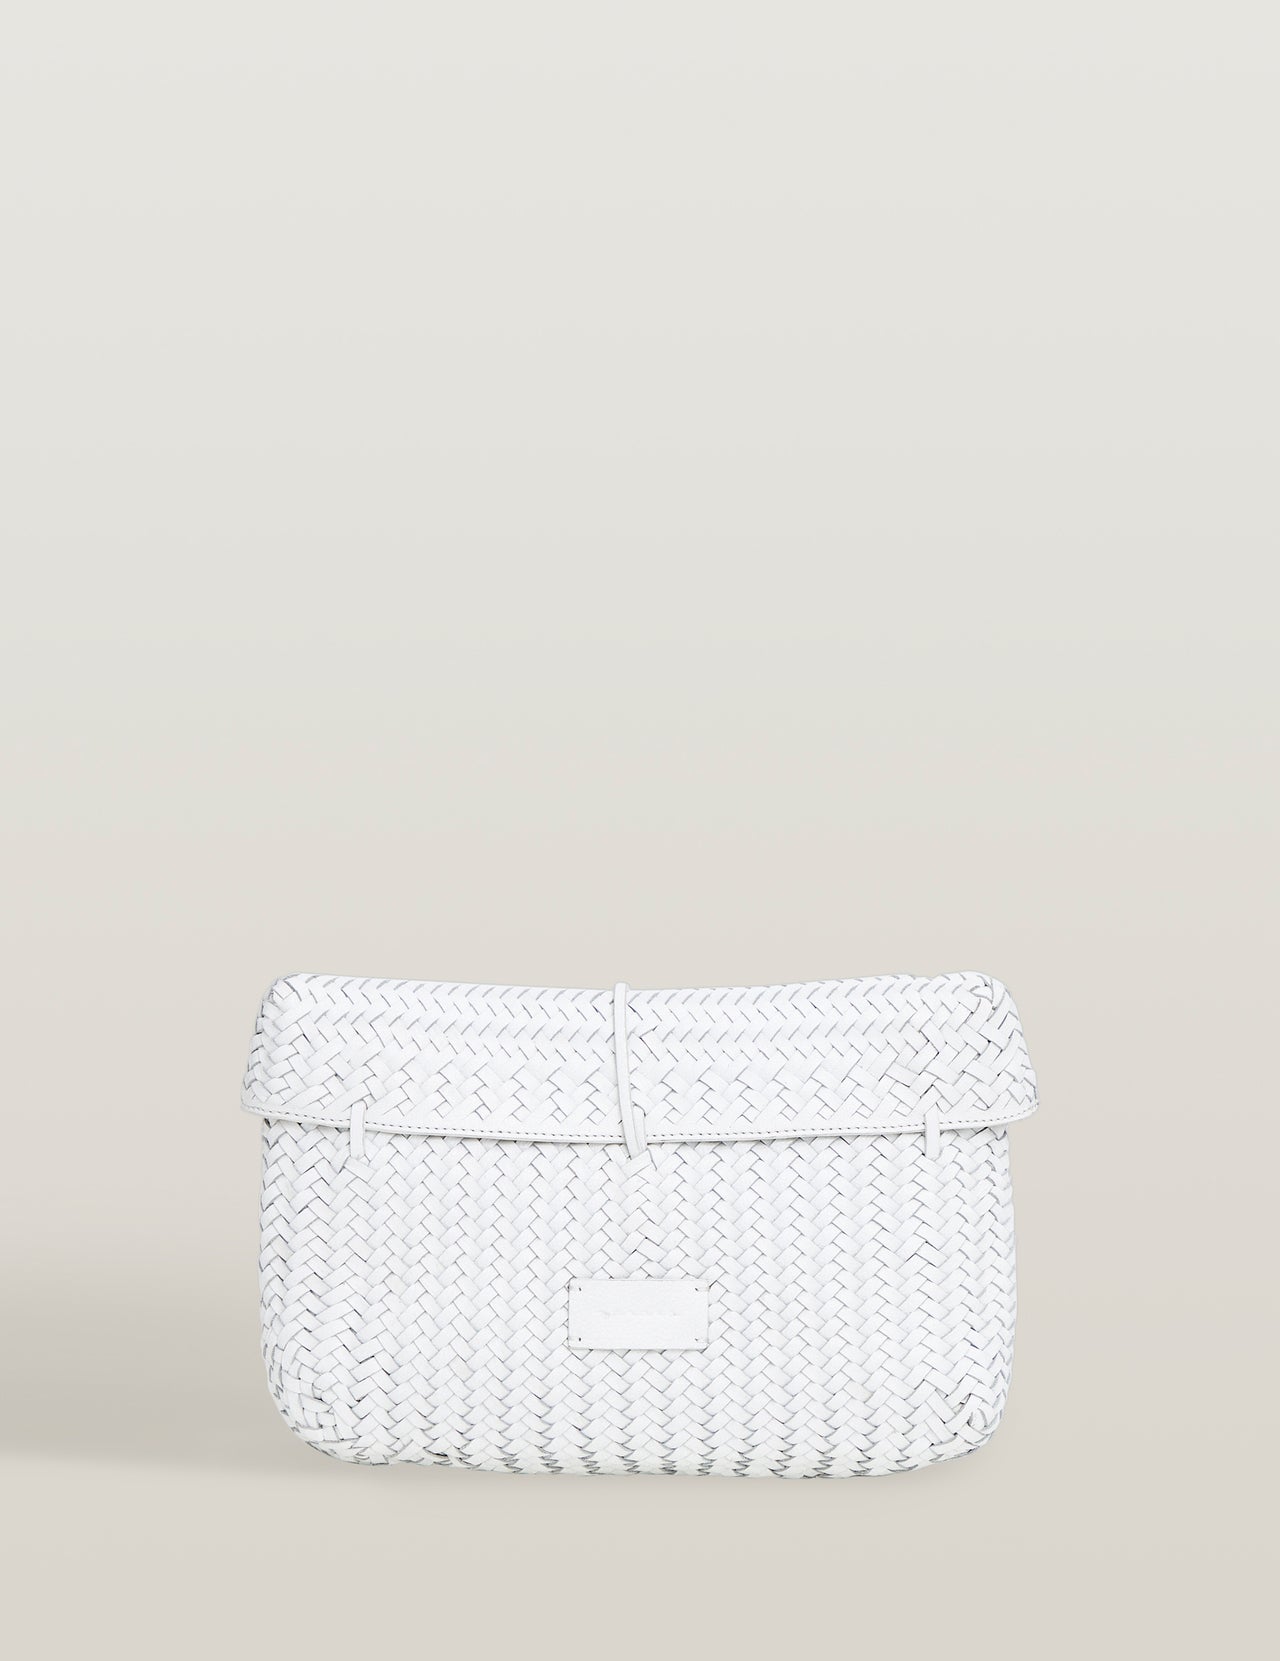  White Handwoven Leather Clutch Bag 